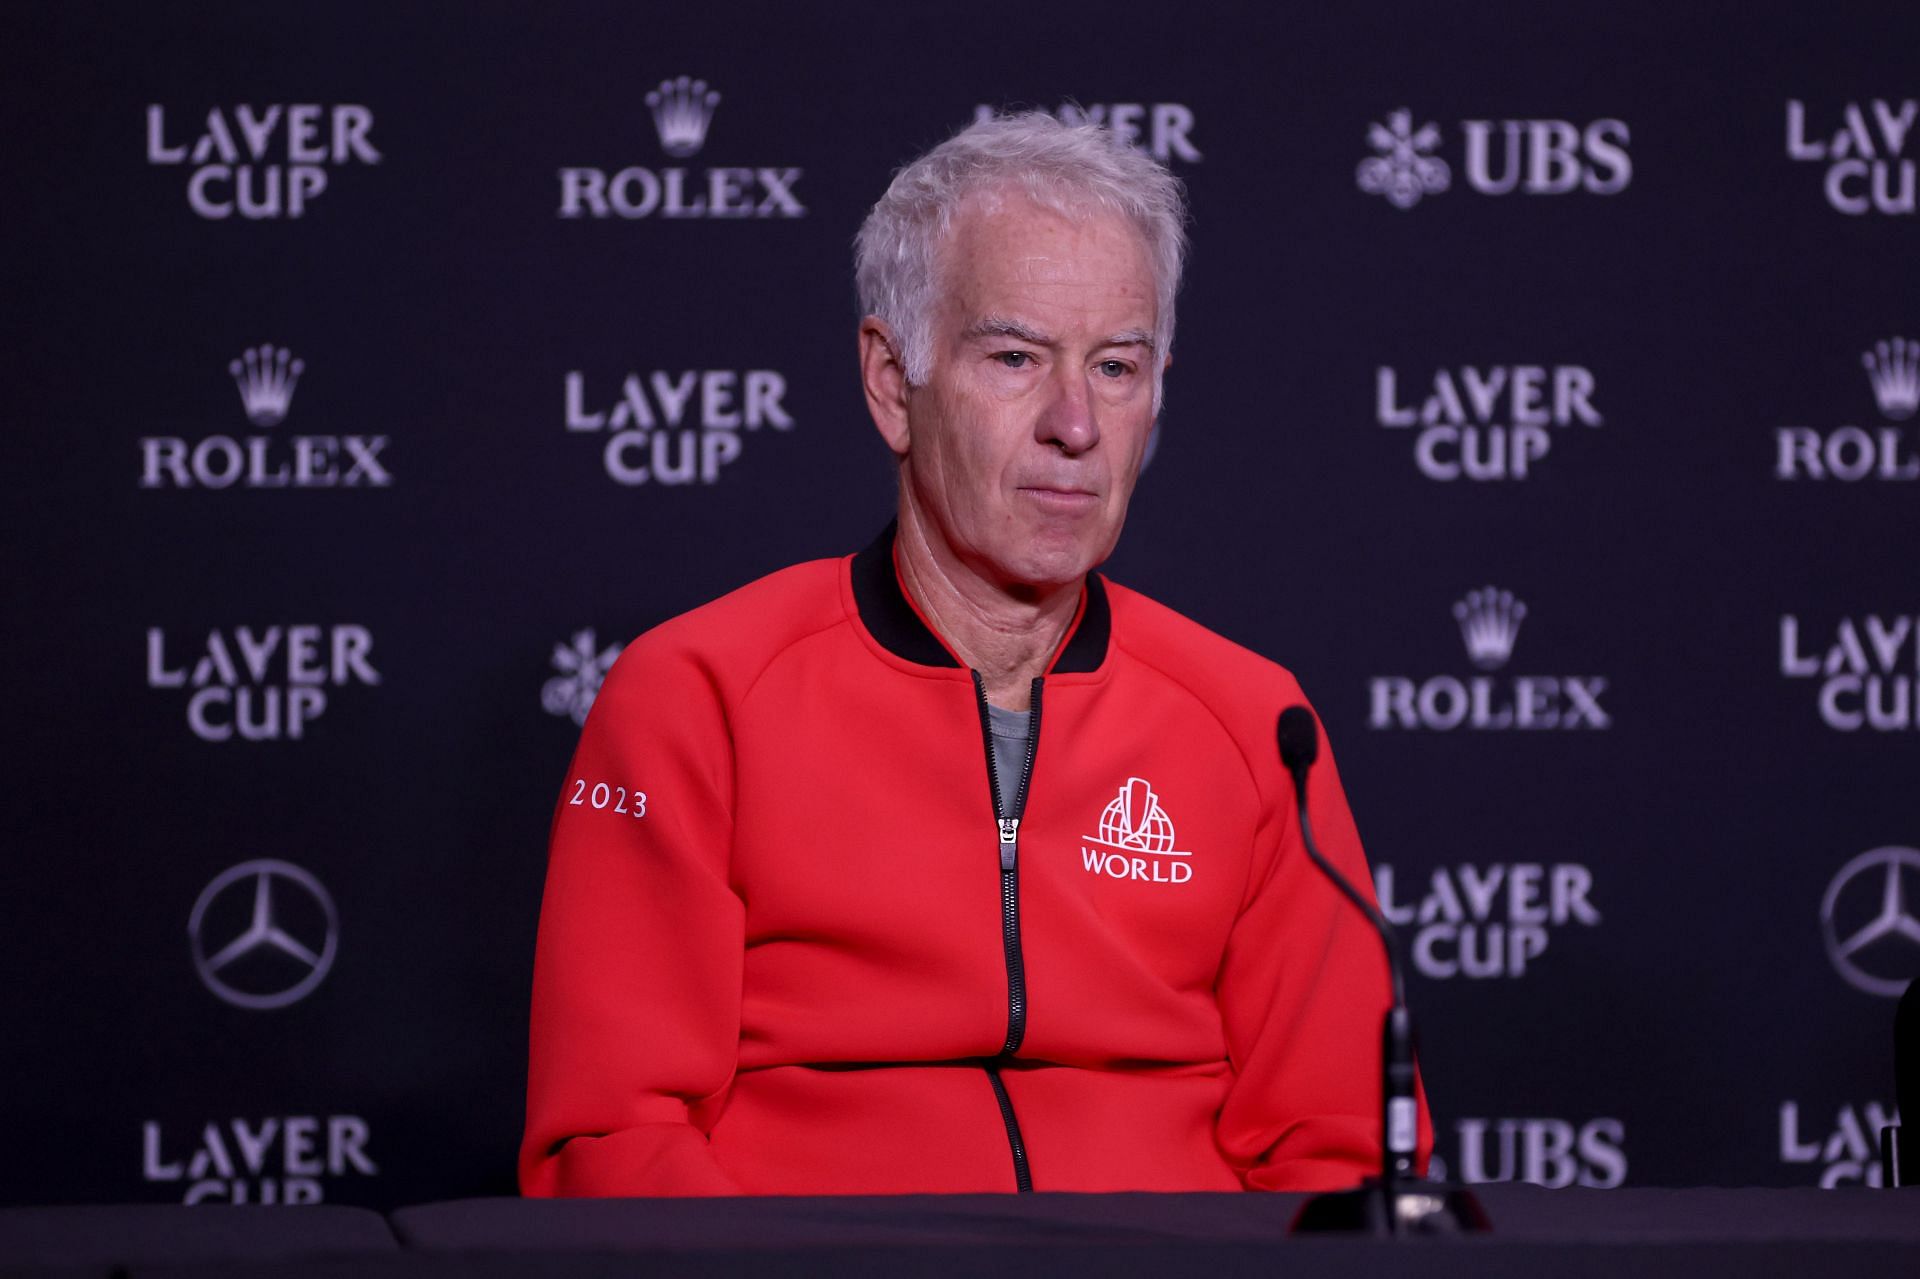 John Mc Enroe spreaking to the press at the 2023 Laver Cup